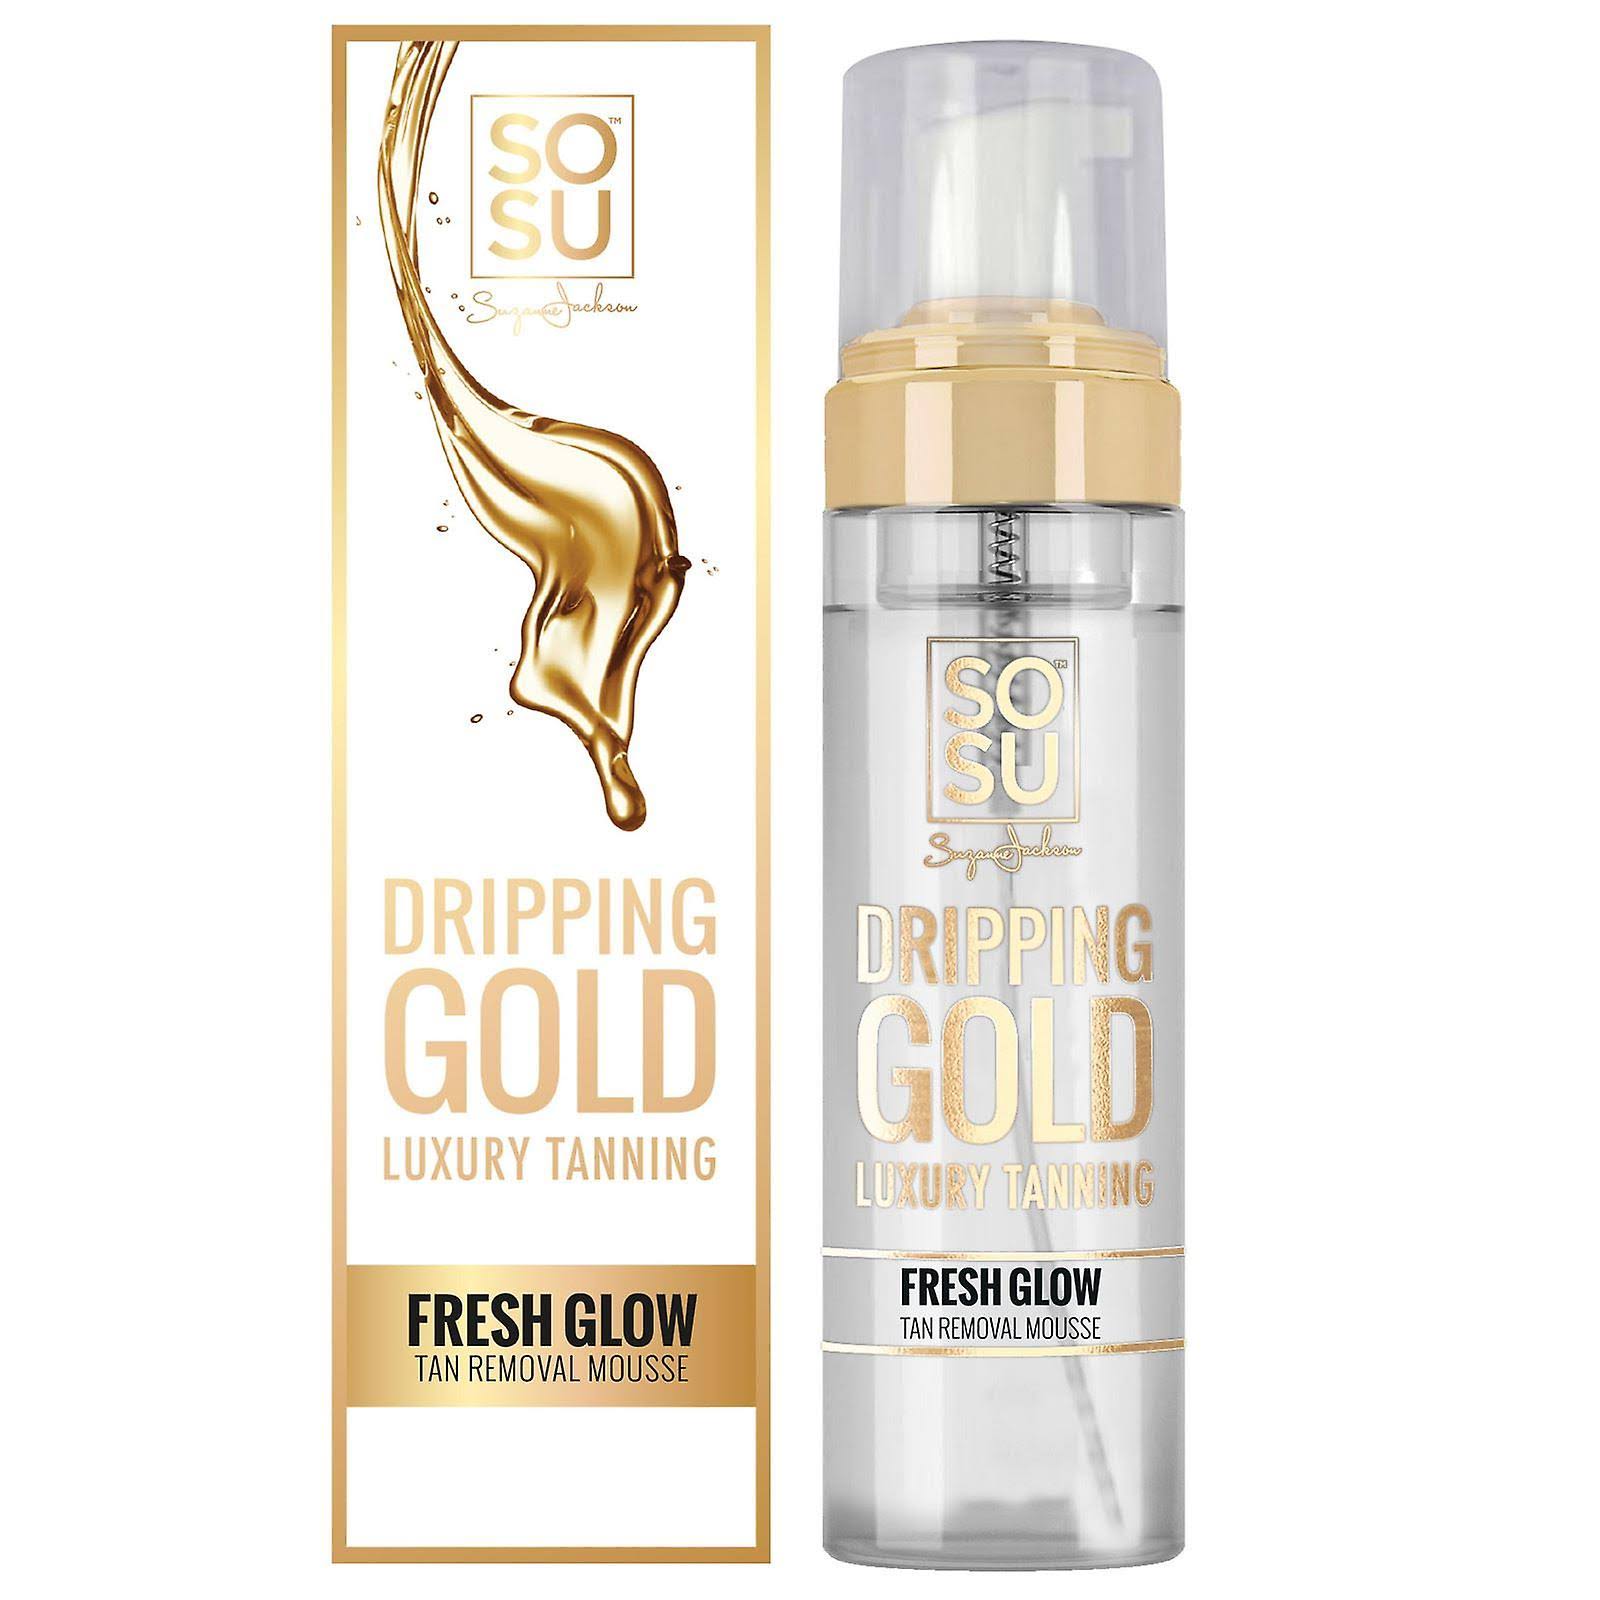 SOSU by Suzanne Jackson Dripping Gold Fresh Glow Tan Removal Mousse